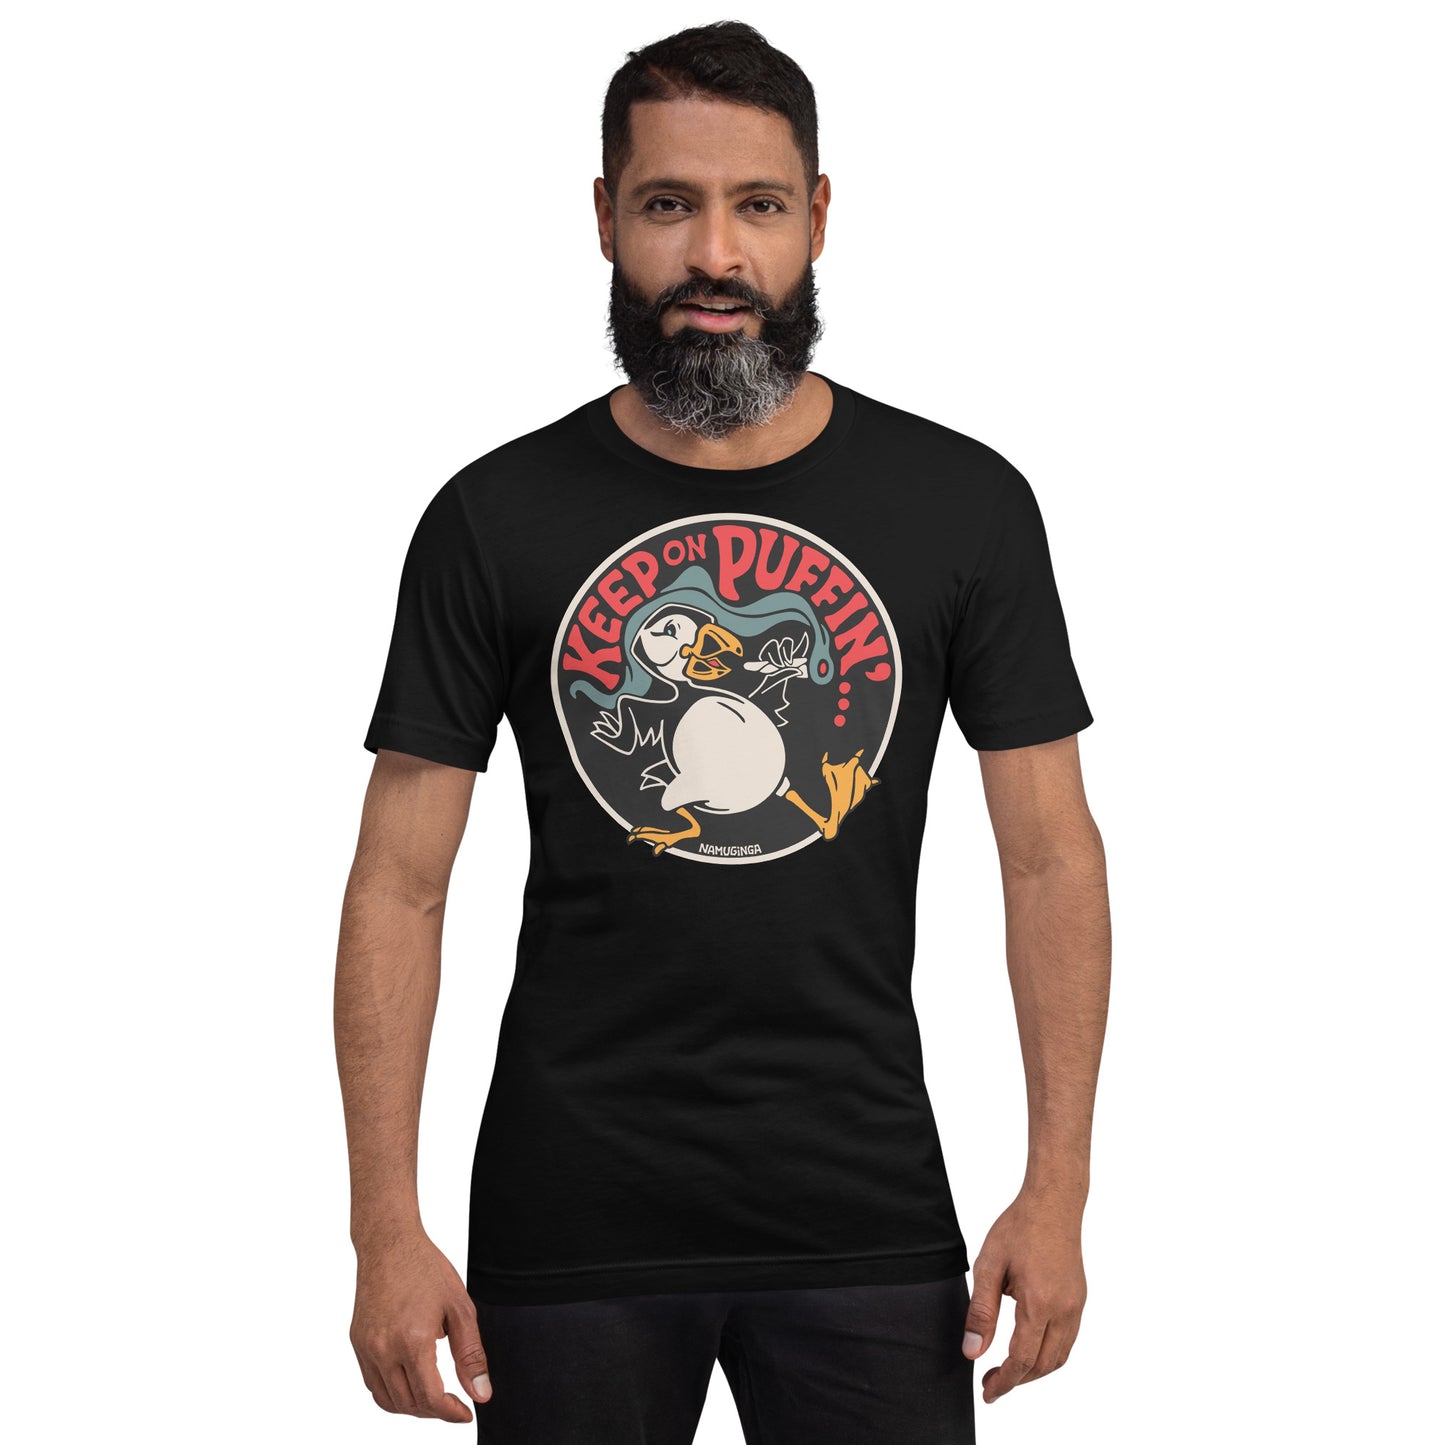 Keep on Puffin' - Unisex t-shirt